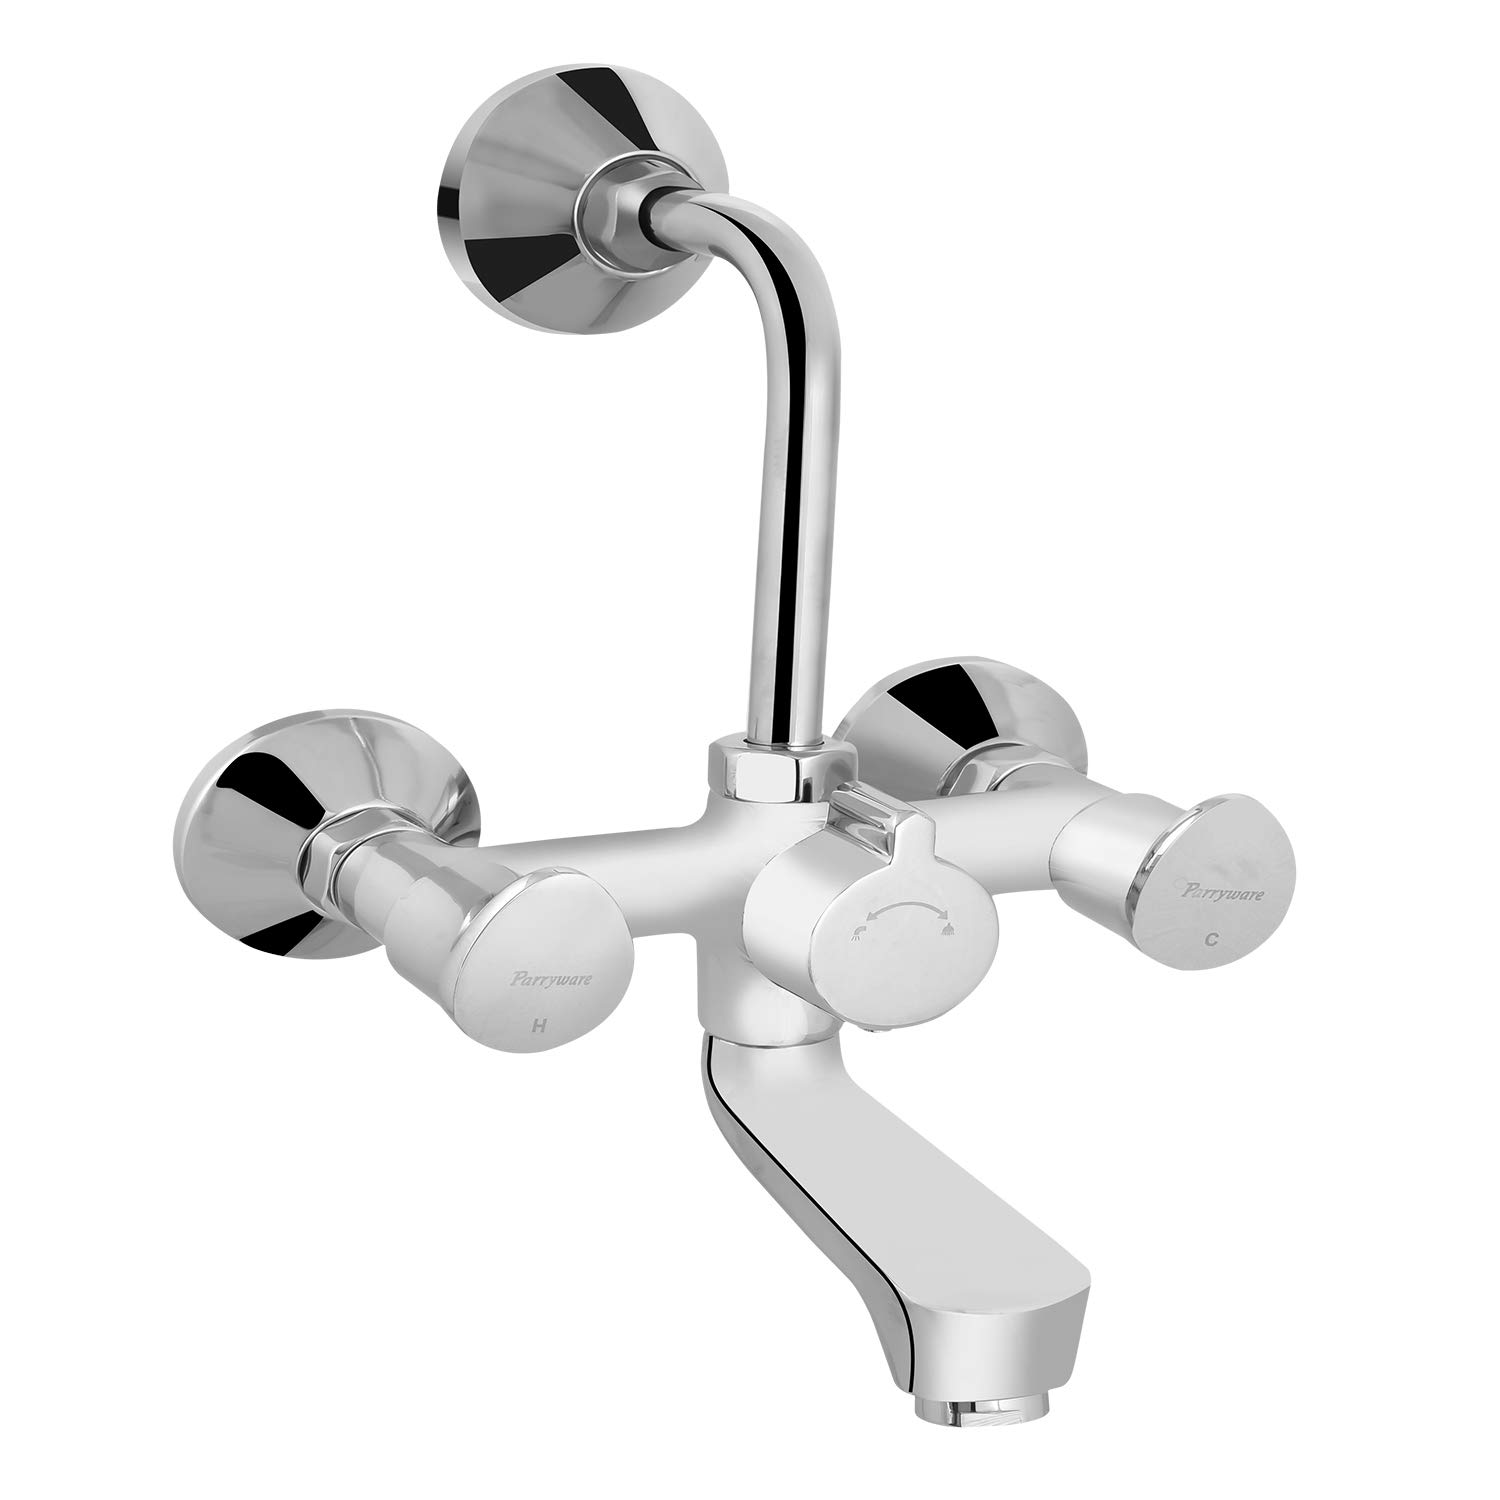 Parryware Droplet Wall mixer 2-in-1 G4716A1 (Quarter Turn Range with Ceramic Innerhead)